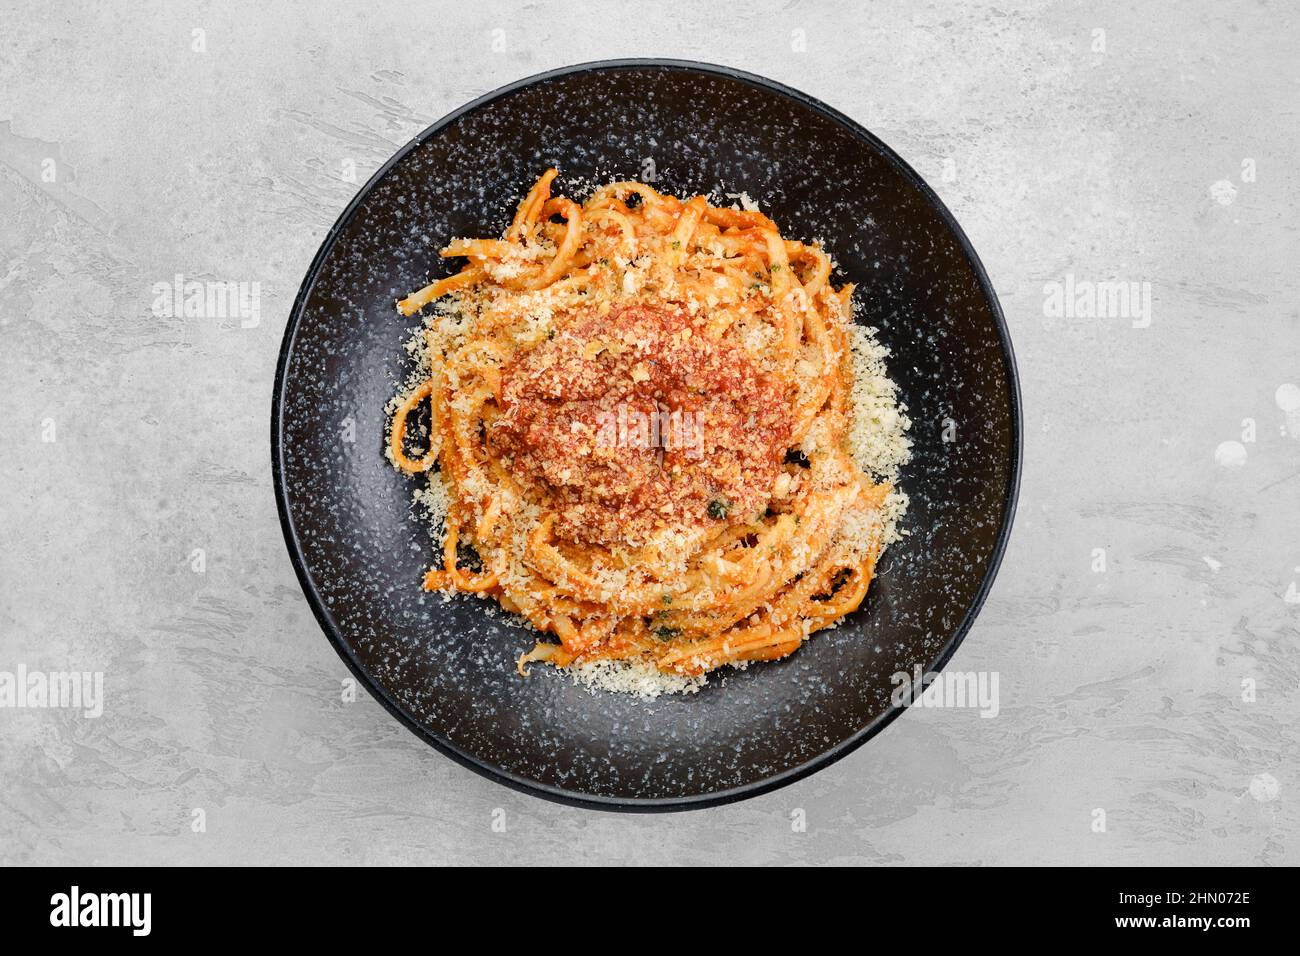 Classic spaghetti bolognese on a plate, top view Stock Photo